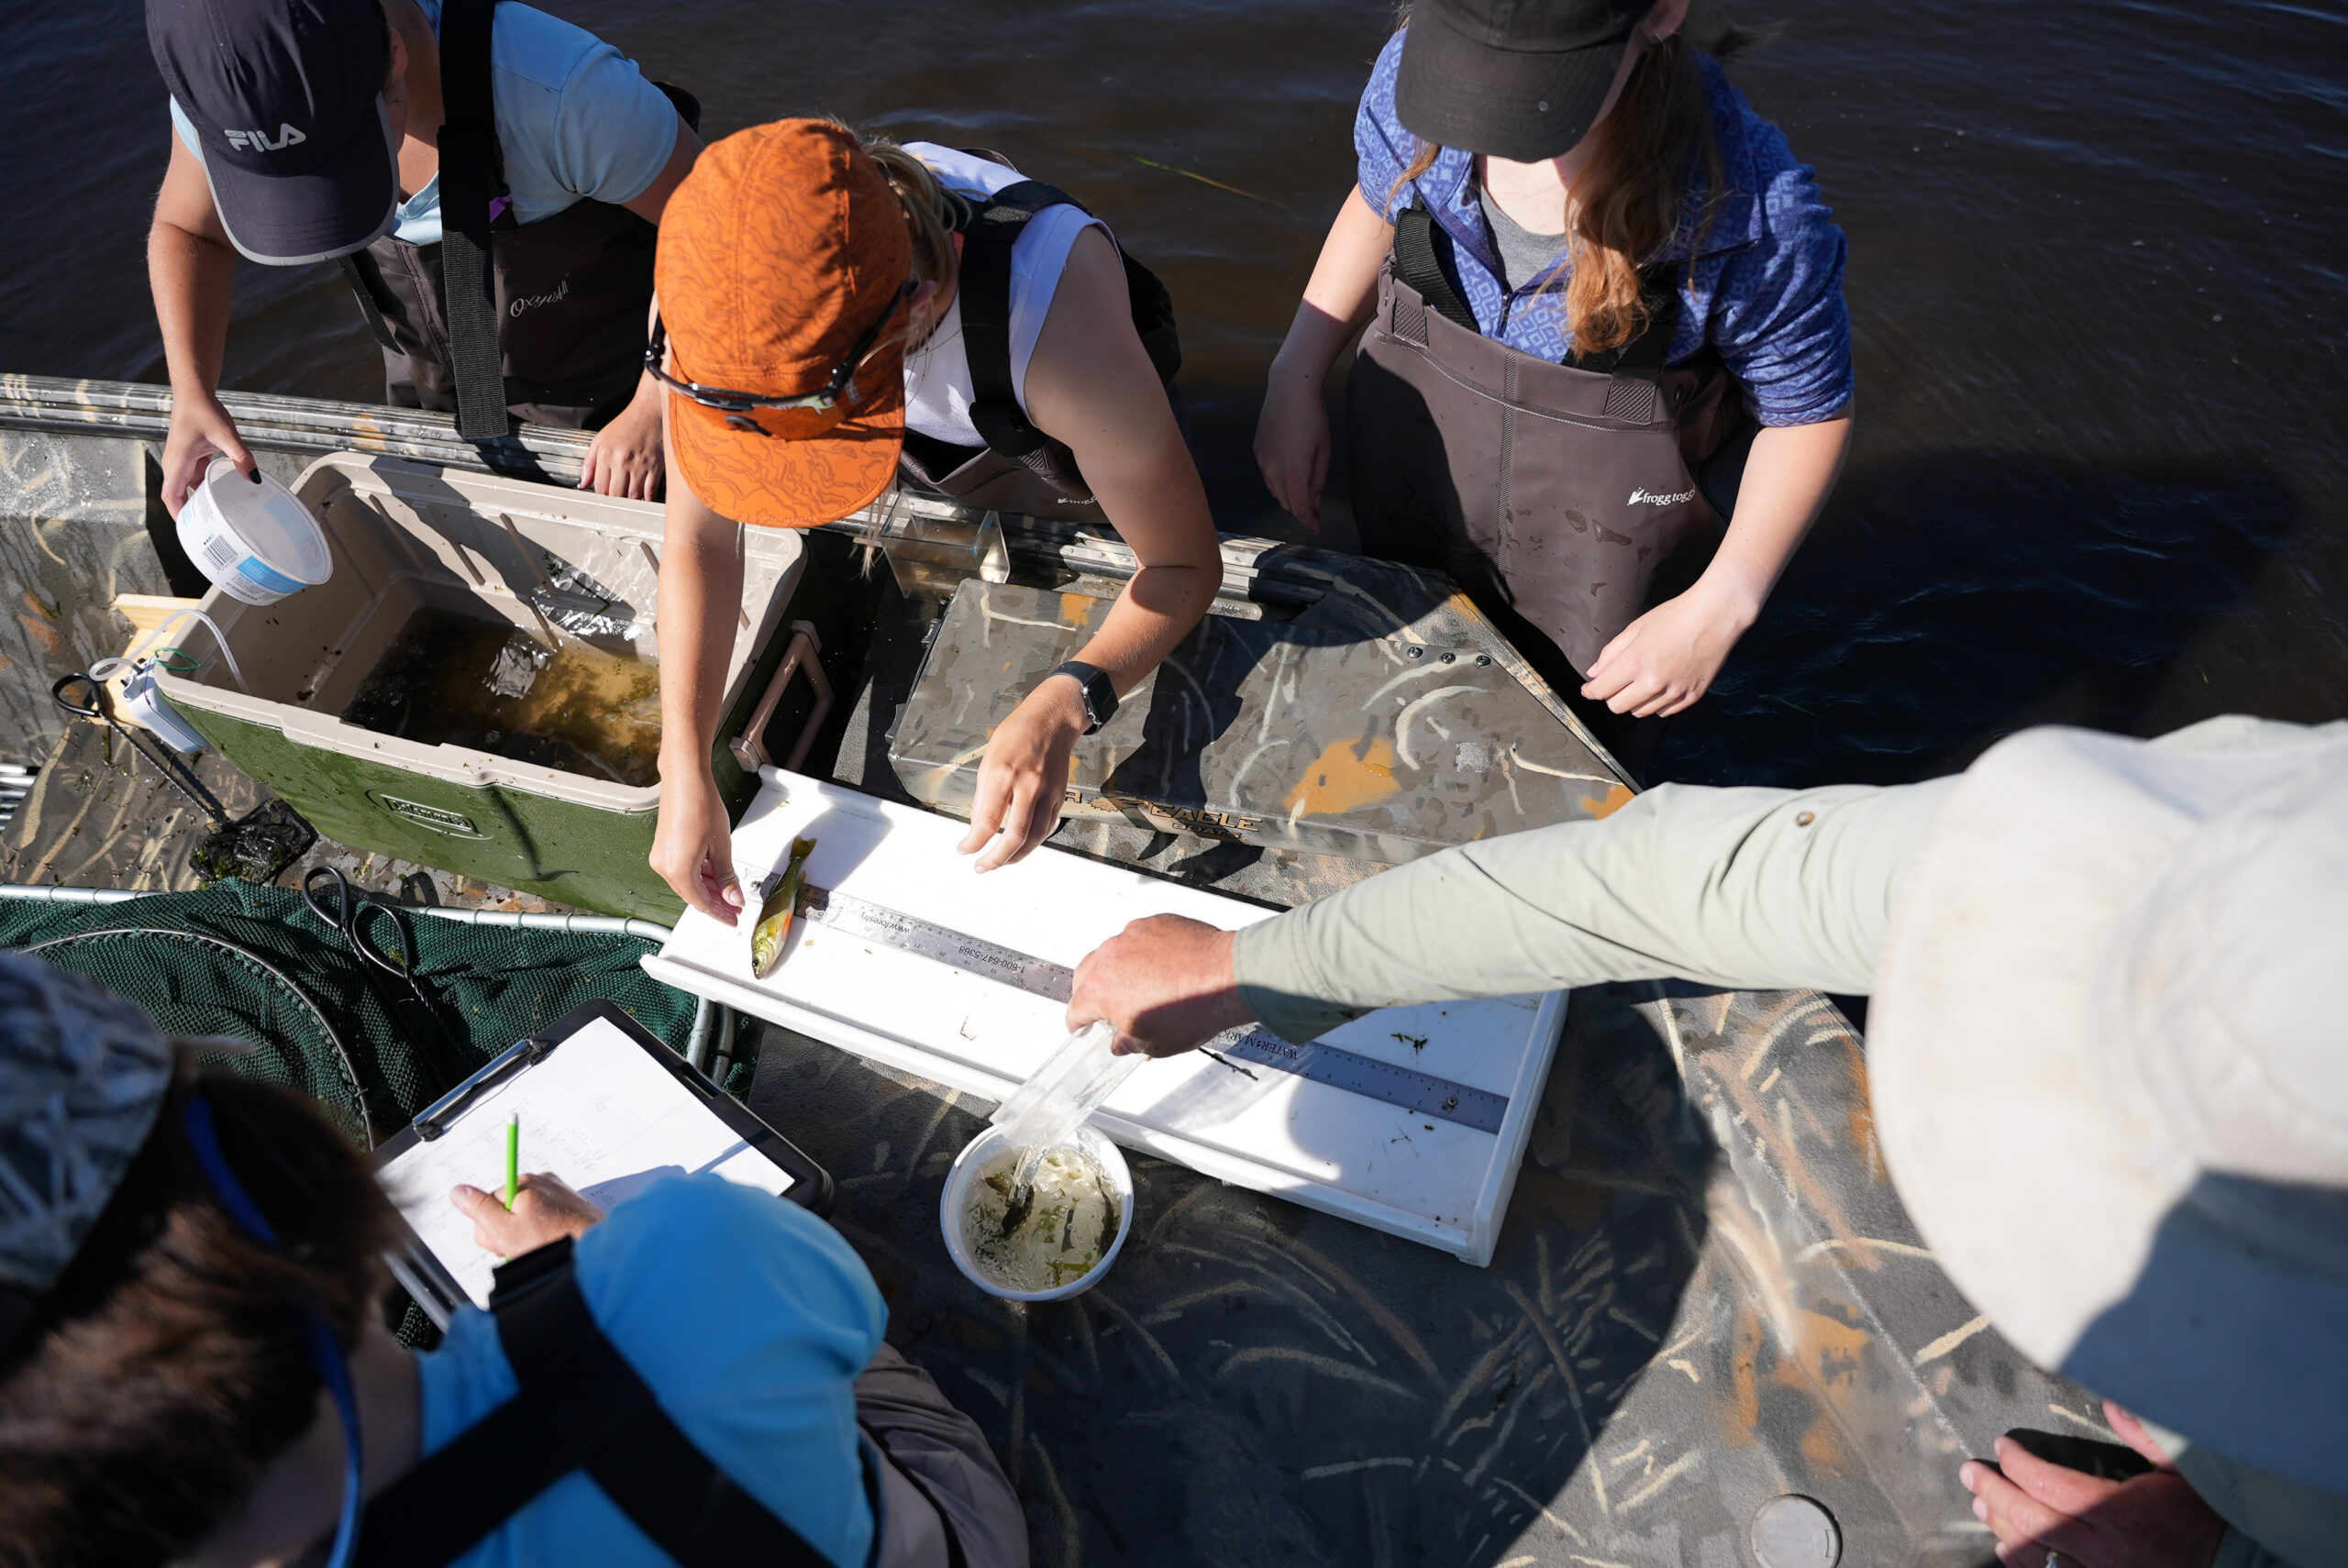 The team measures fish caught during their survey